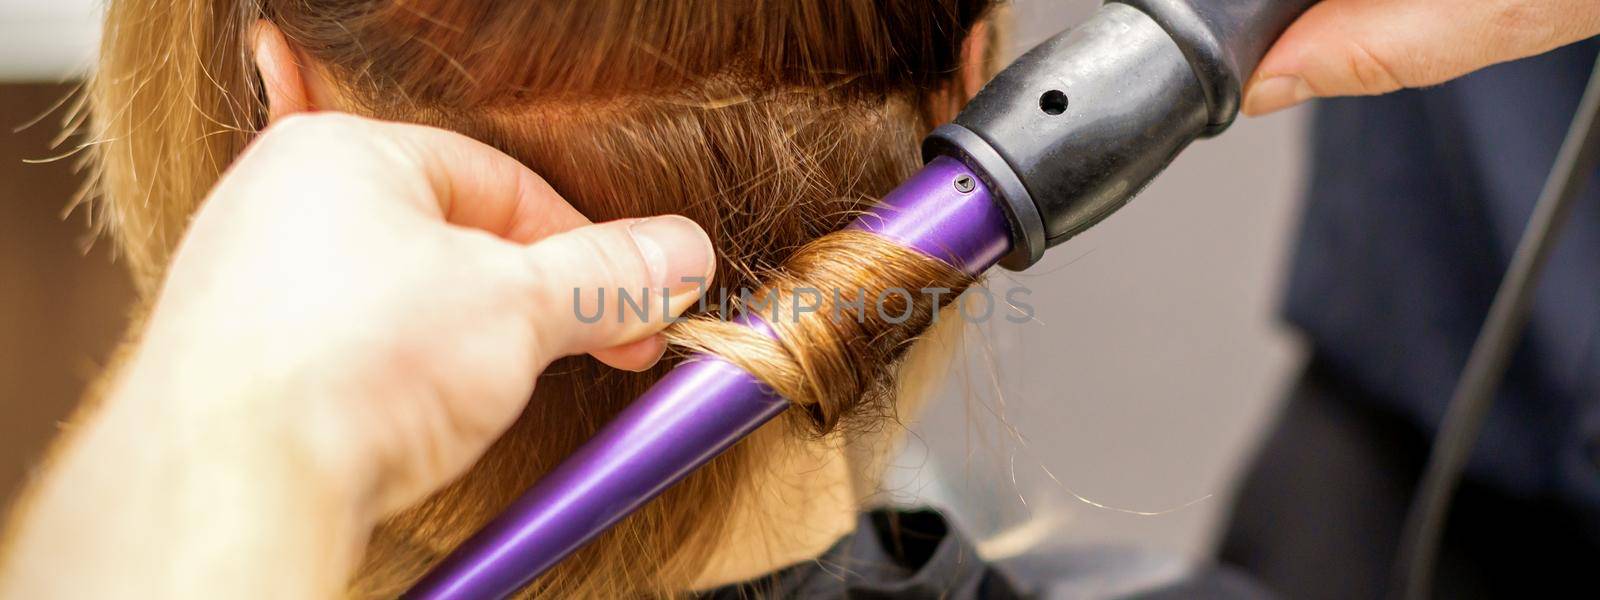 Close up of hairstylist's hands using a curling iron for hair curls in a beauty salon. by okskukuruza